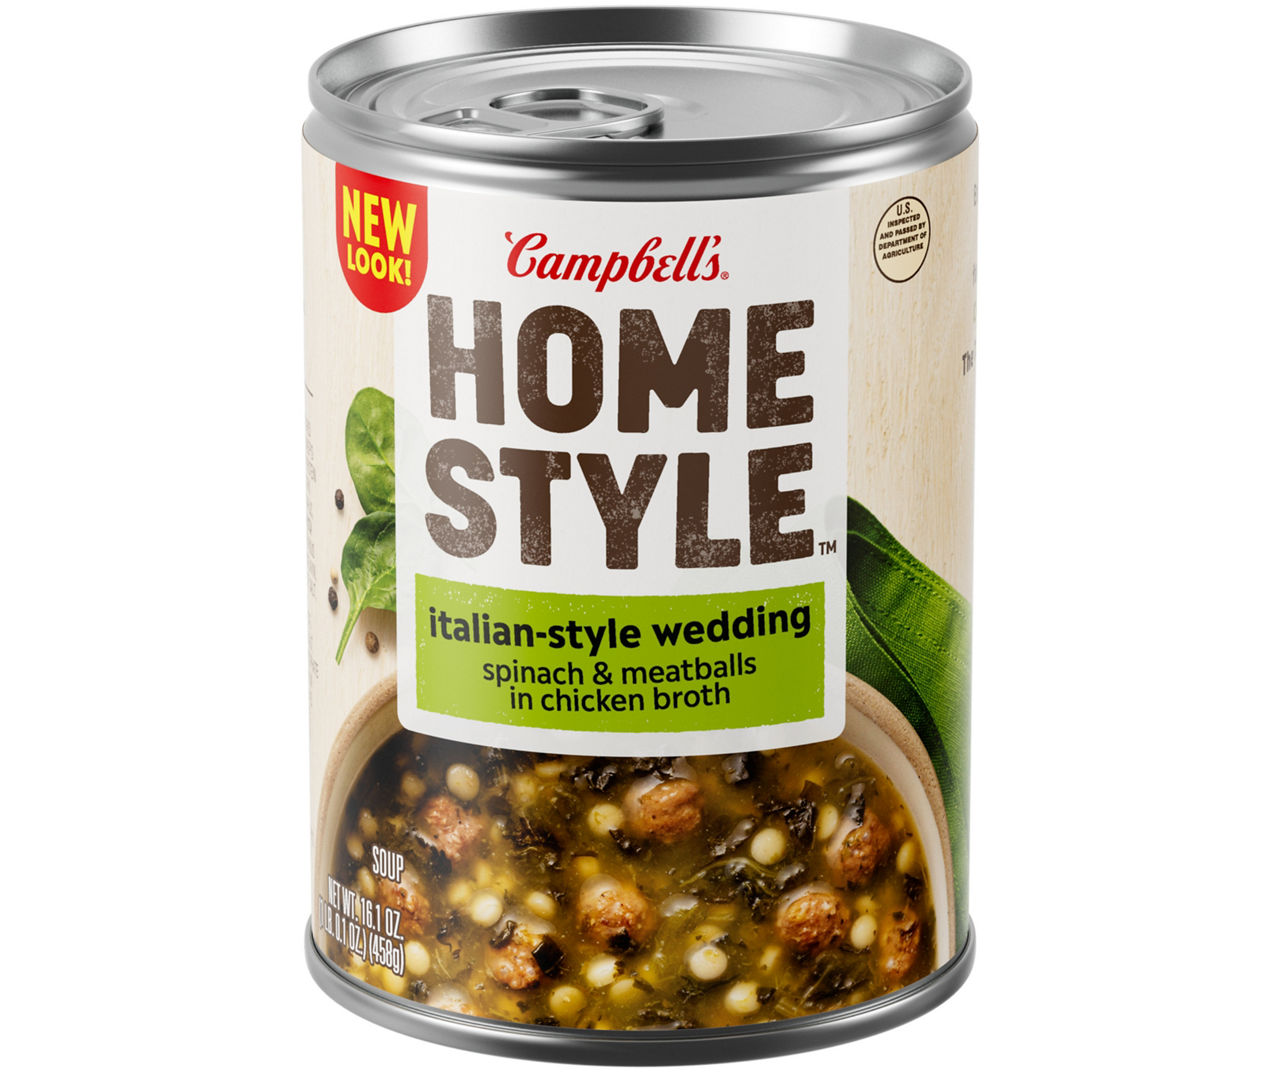 Campbell's Homestyle Soup, 16.1 Oz. Can